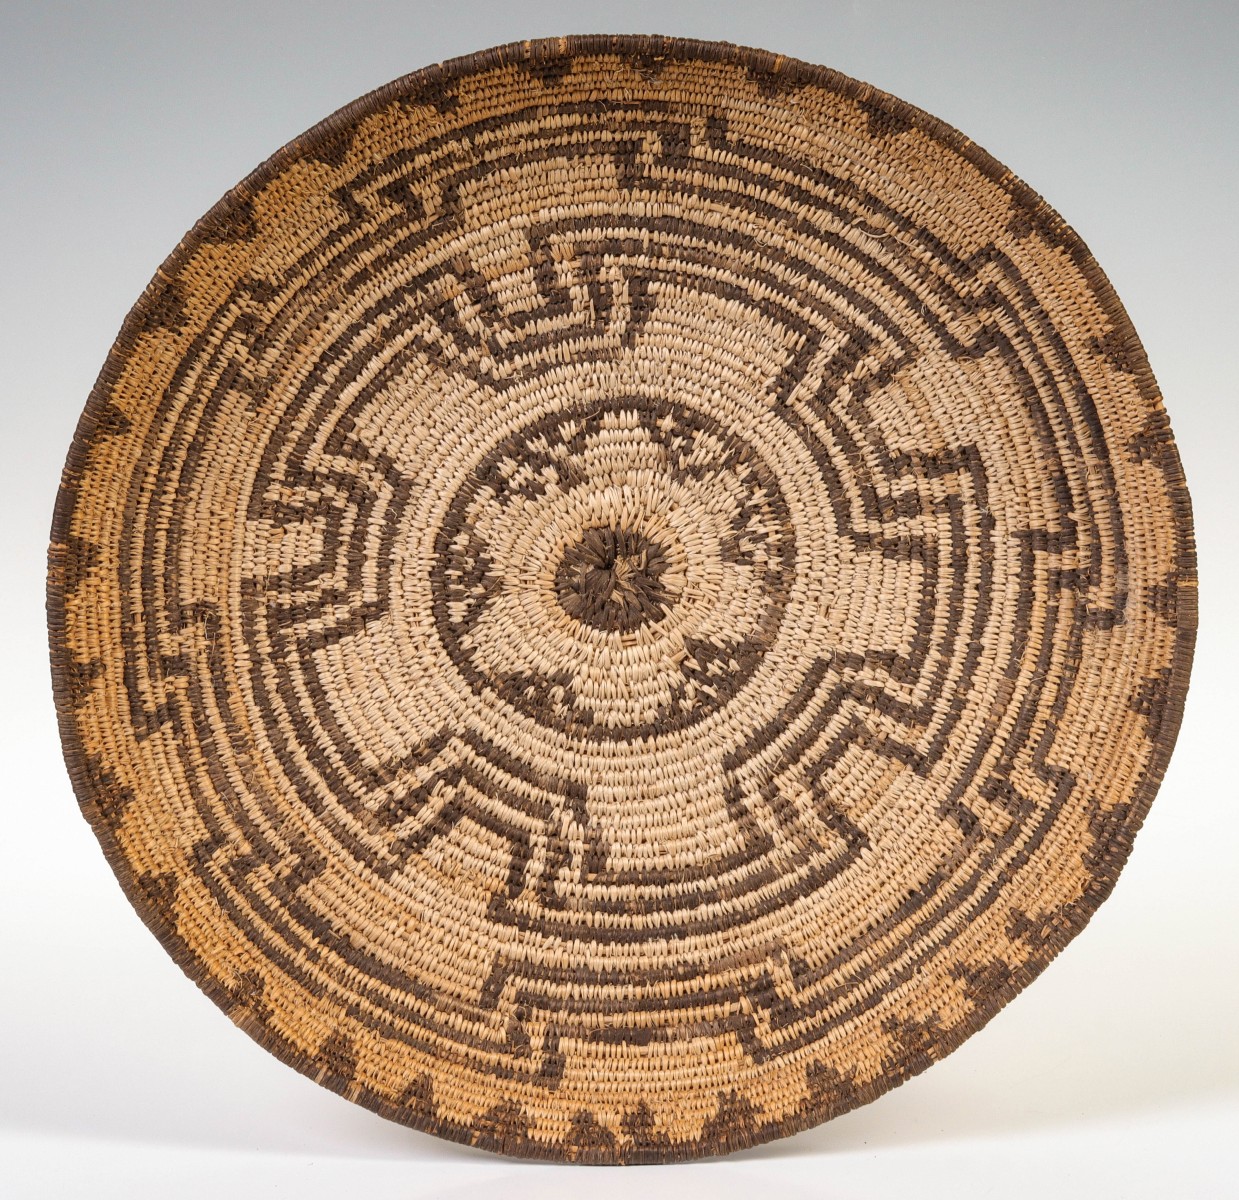 A LOOSELY WOVEN EARLY 20TH CENTURY PIMA BASKETRY TRAY